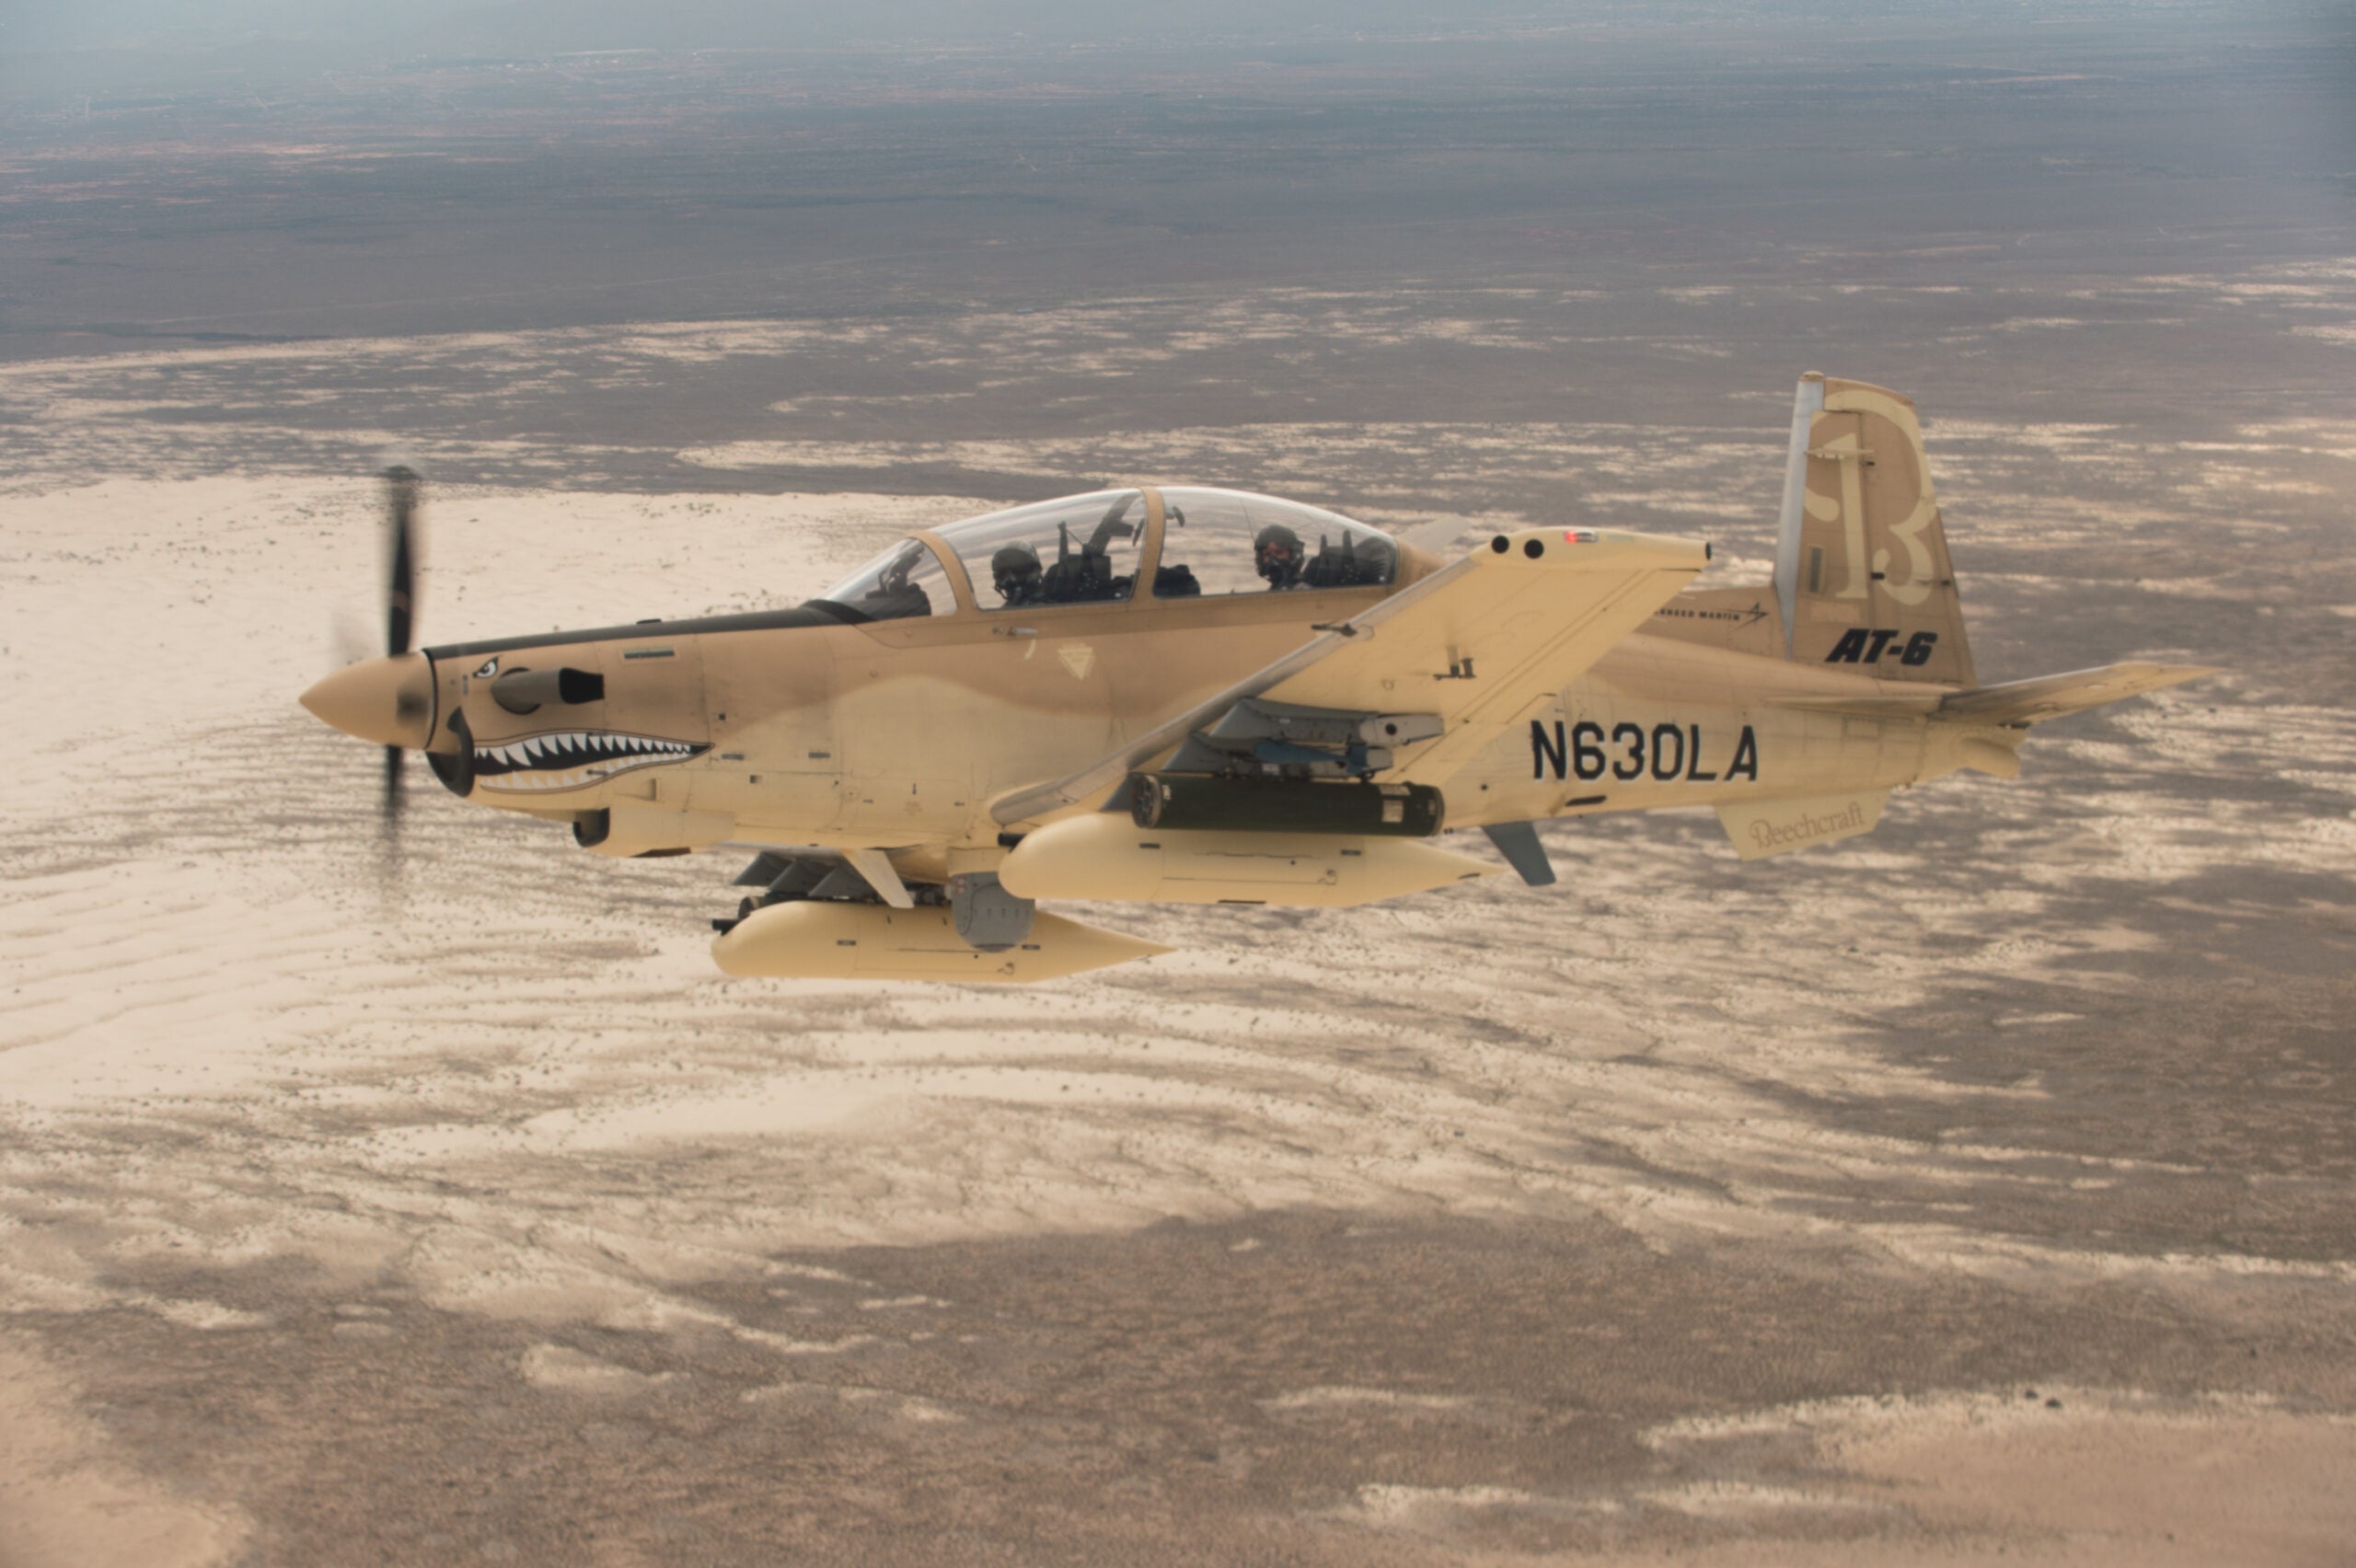 HOLLOMAN AIR FORCE BASE, N.M. (July 31, 2017) A Beechcraft AT-6 experimental aircraft flies over White Sands Missile Range. The AT-6 is participating in the U.S. Air Force Light Attack Experiment (OA-X), a series of trials to determine the feasibility of using light aircraft in attack roles. (U.S. Air Force Photo by Ethan D. Wagner)